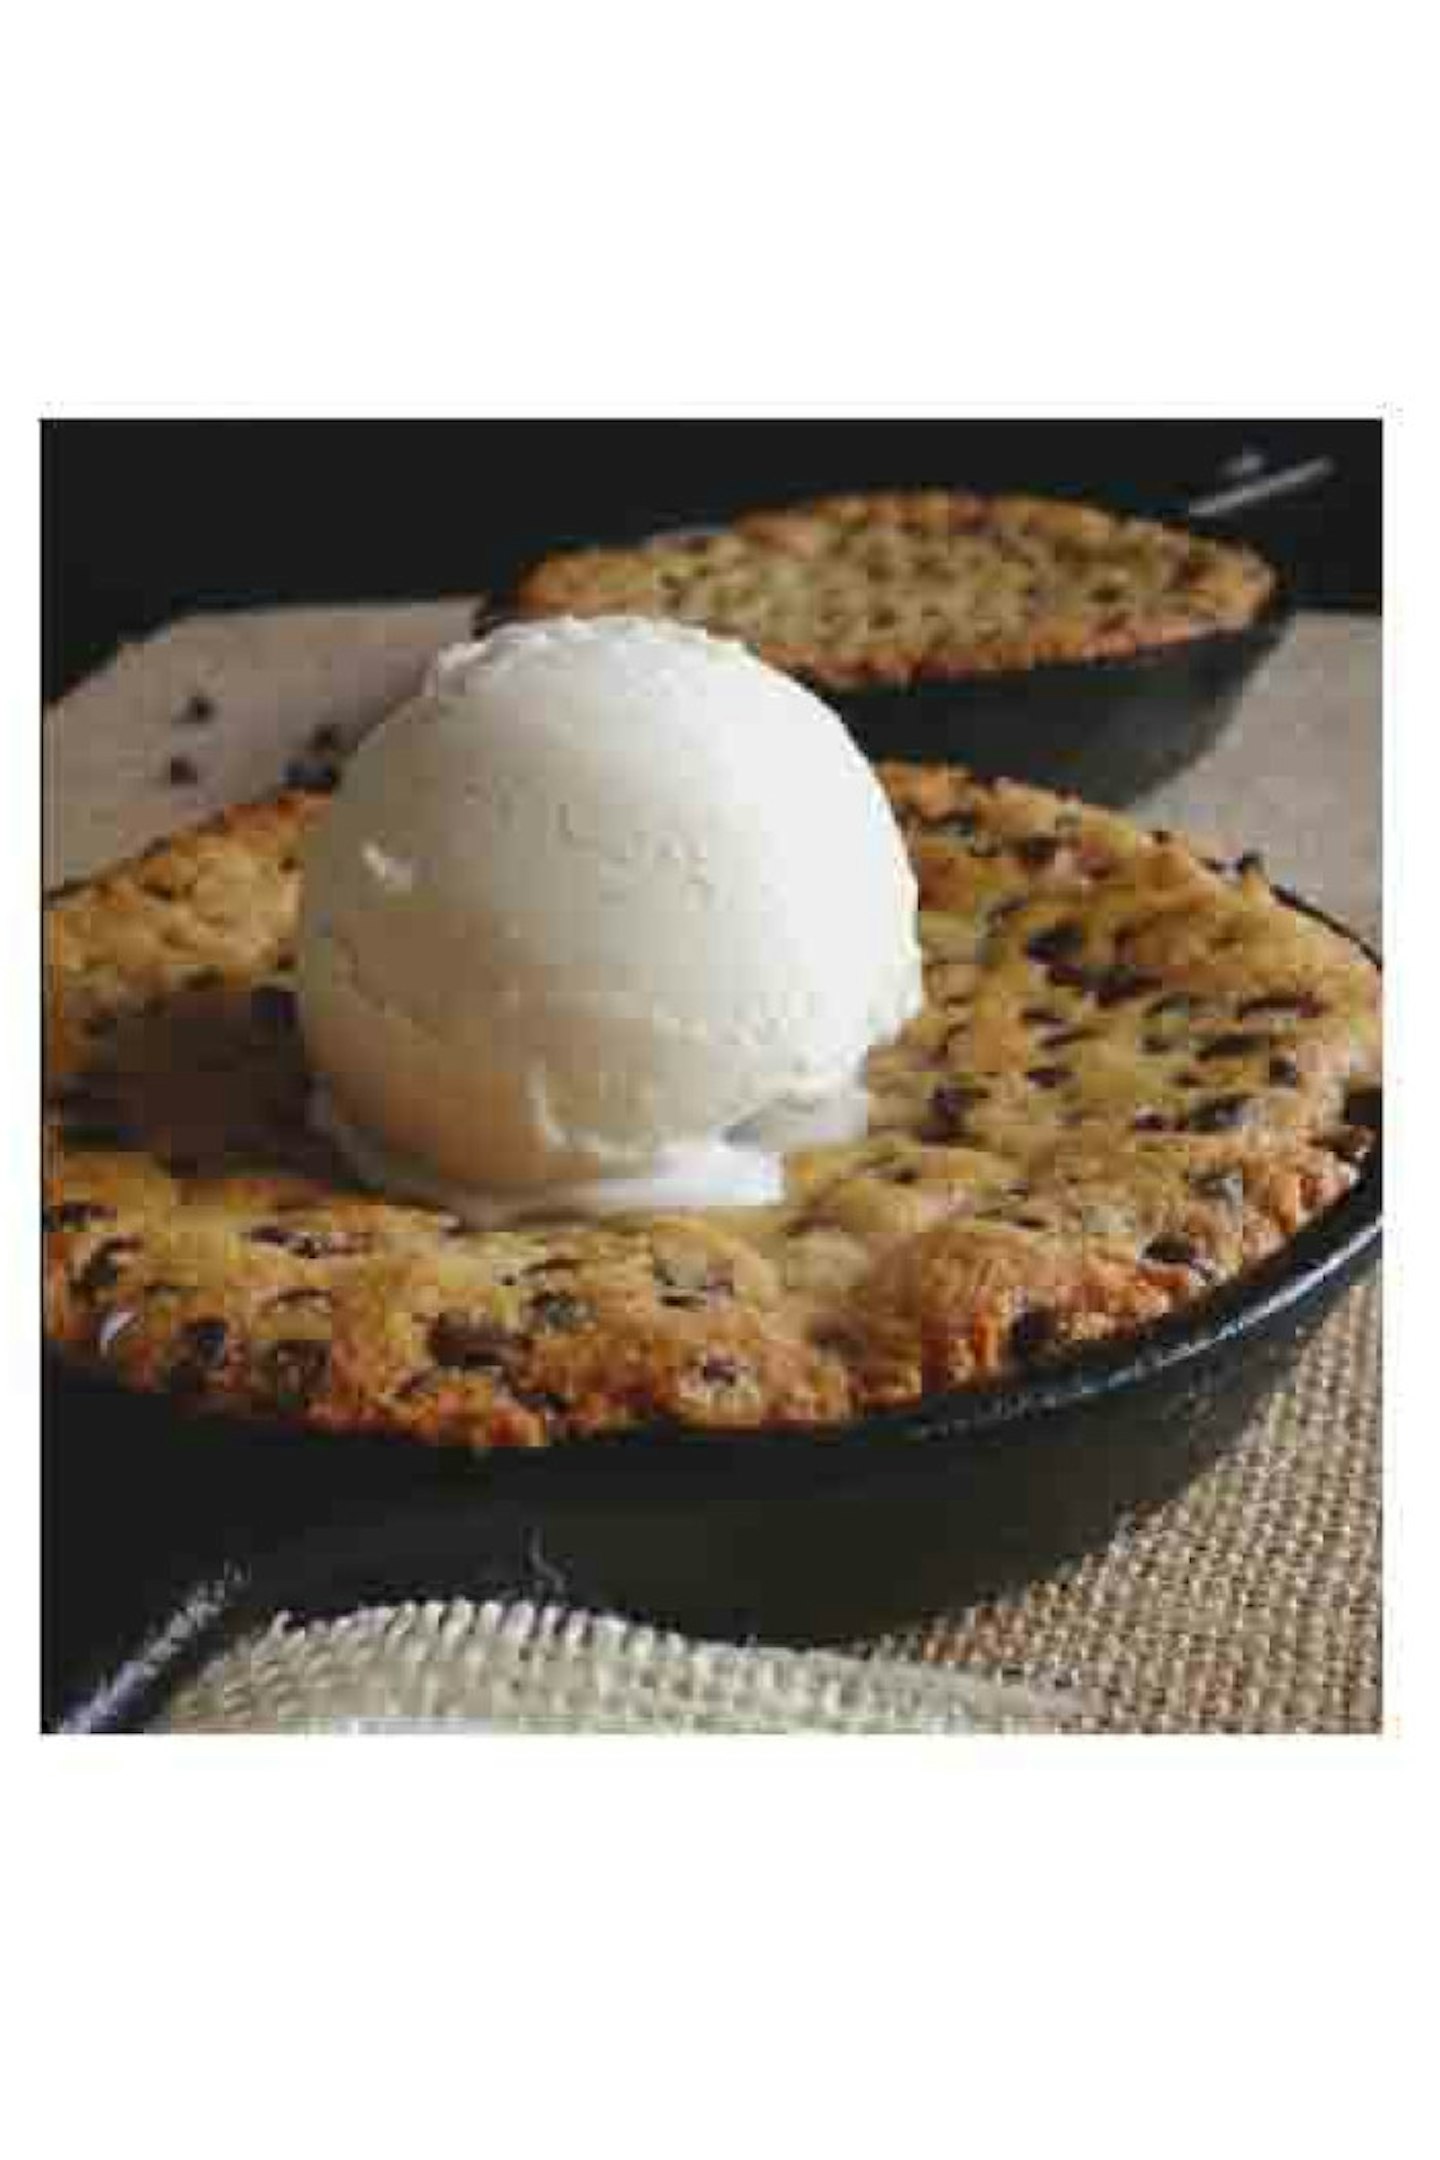 8. THE PIZOOKIE